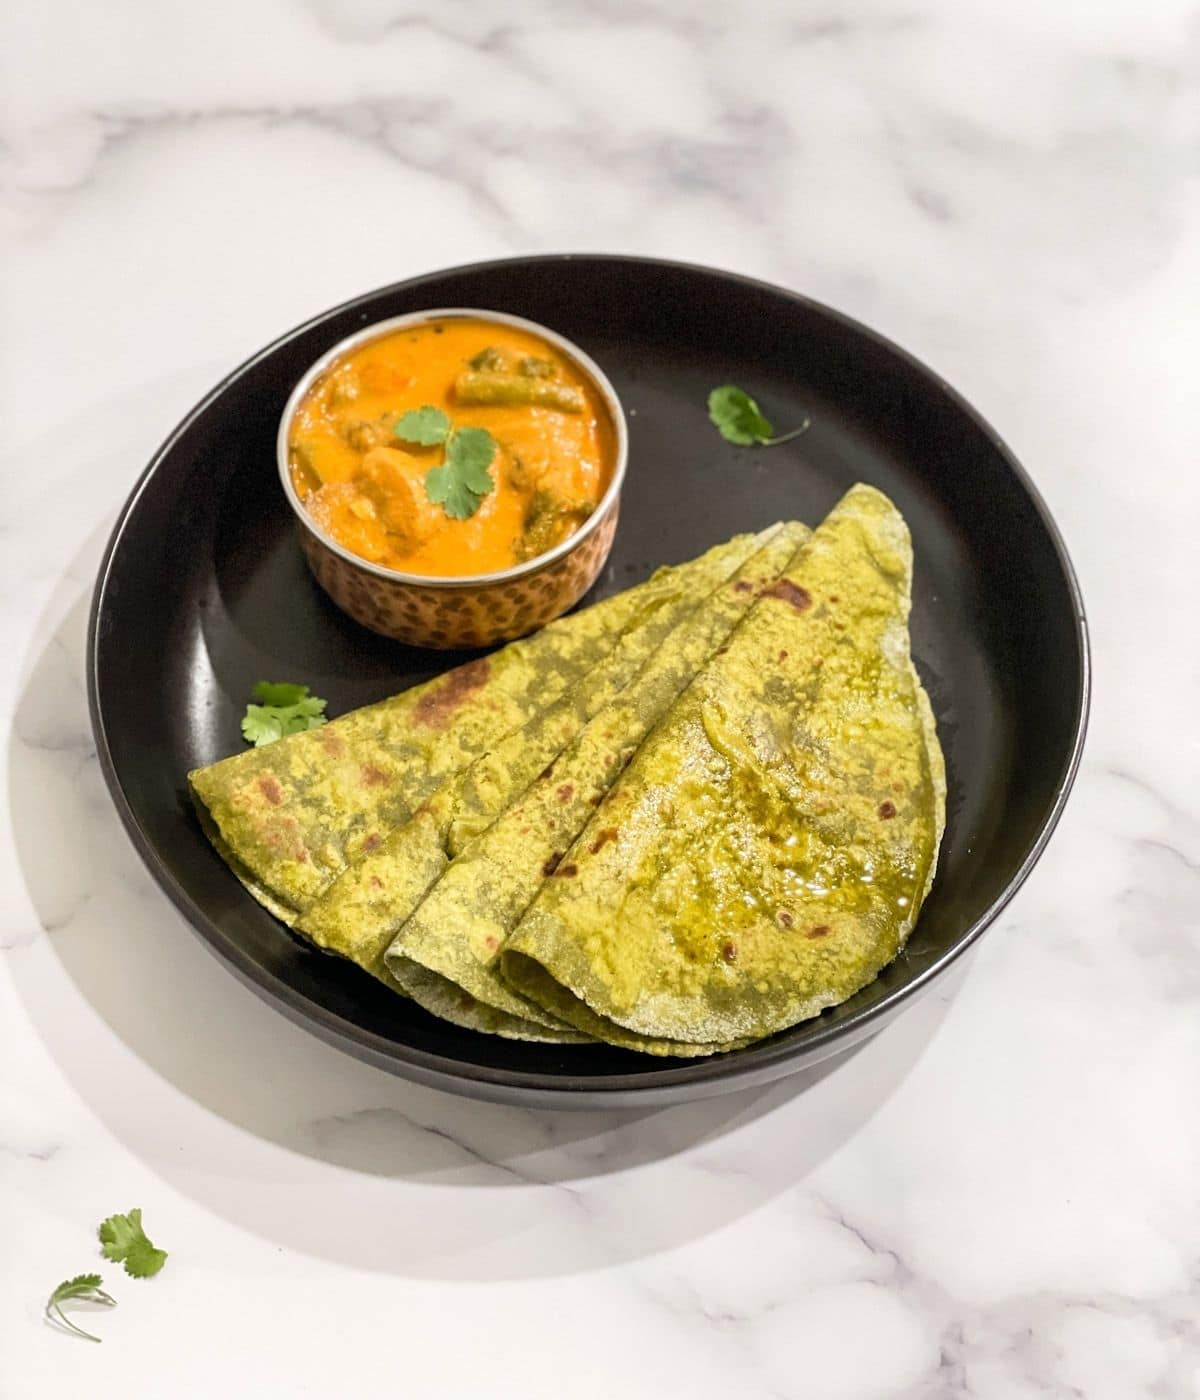 Spinach paratha is placed on the black color plate with curry.